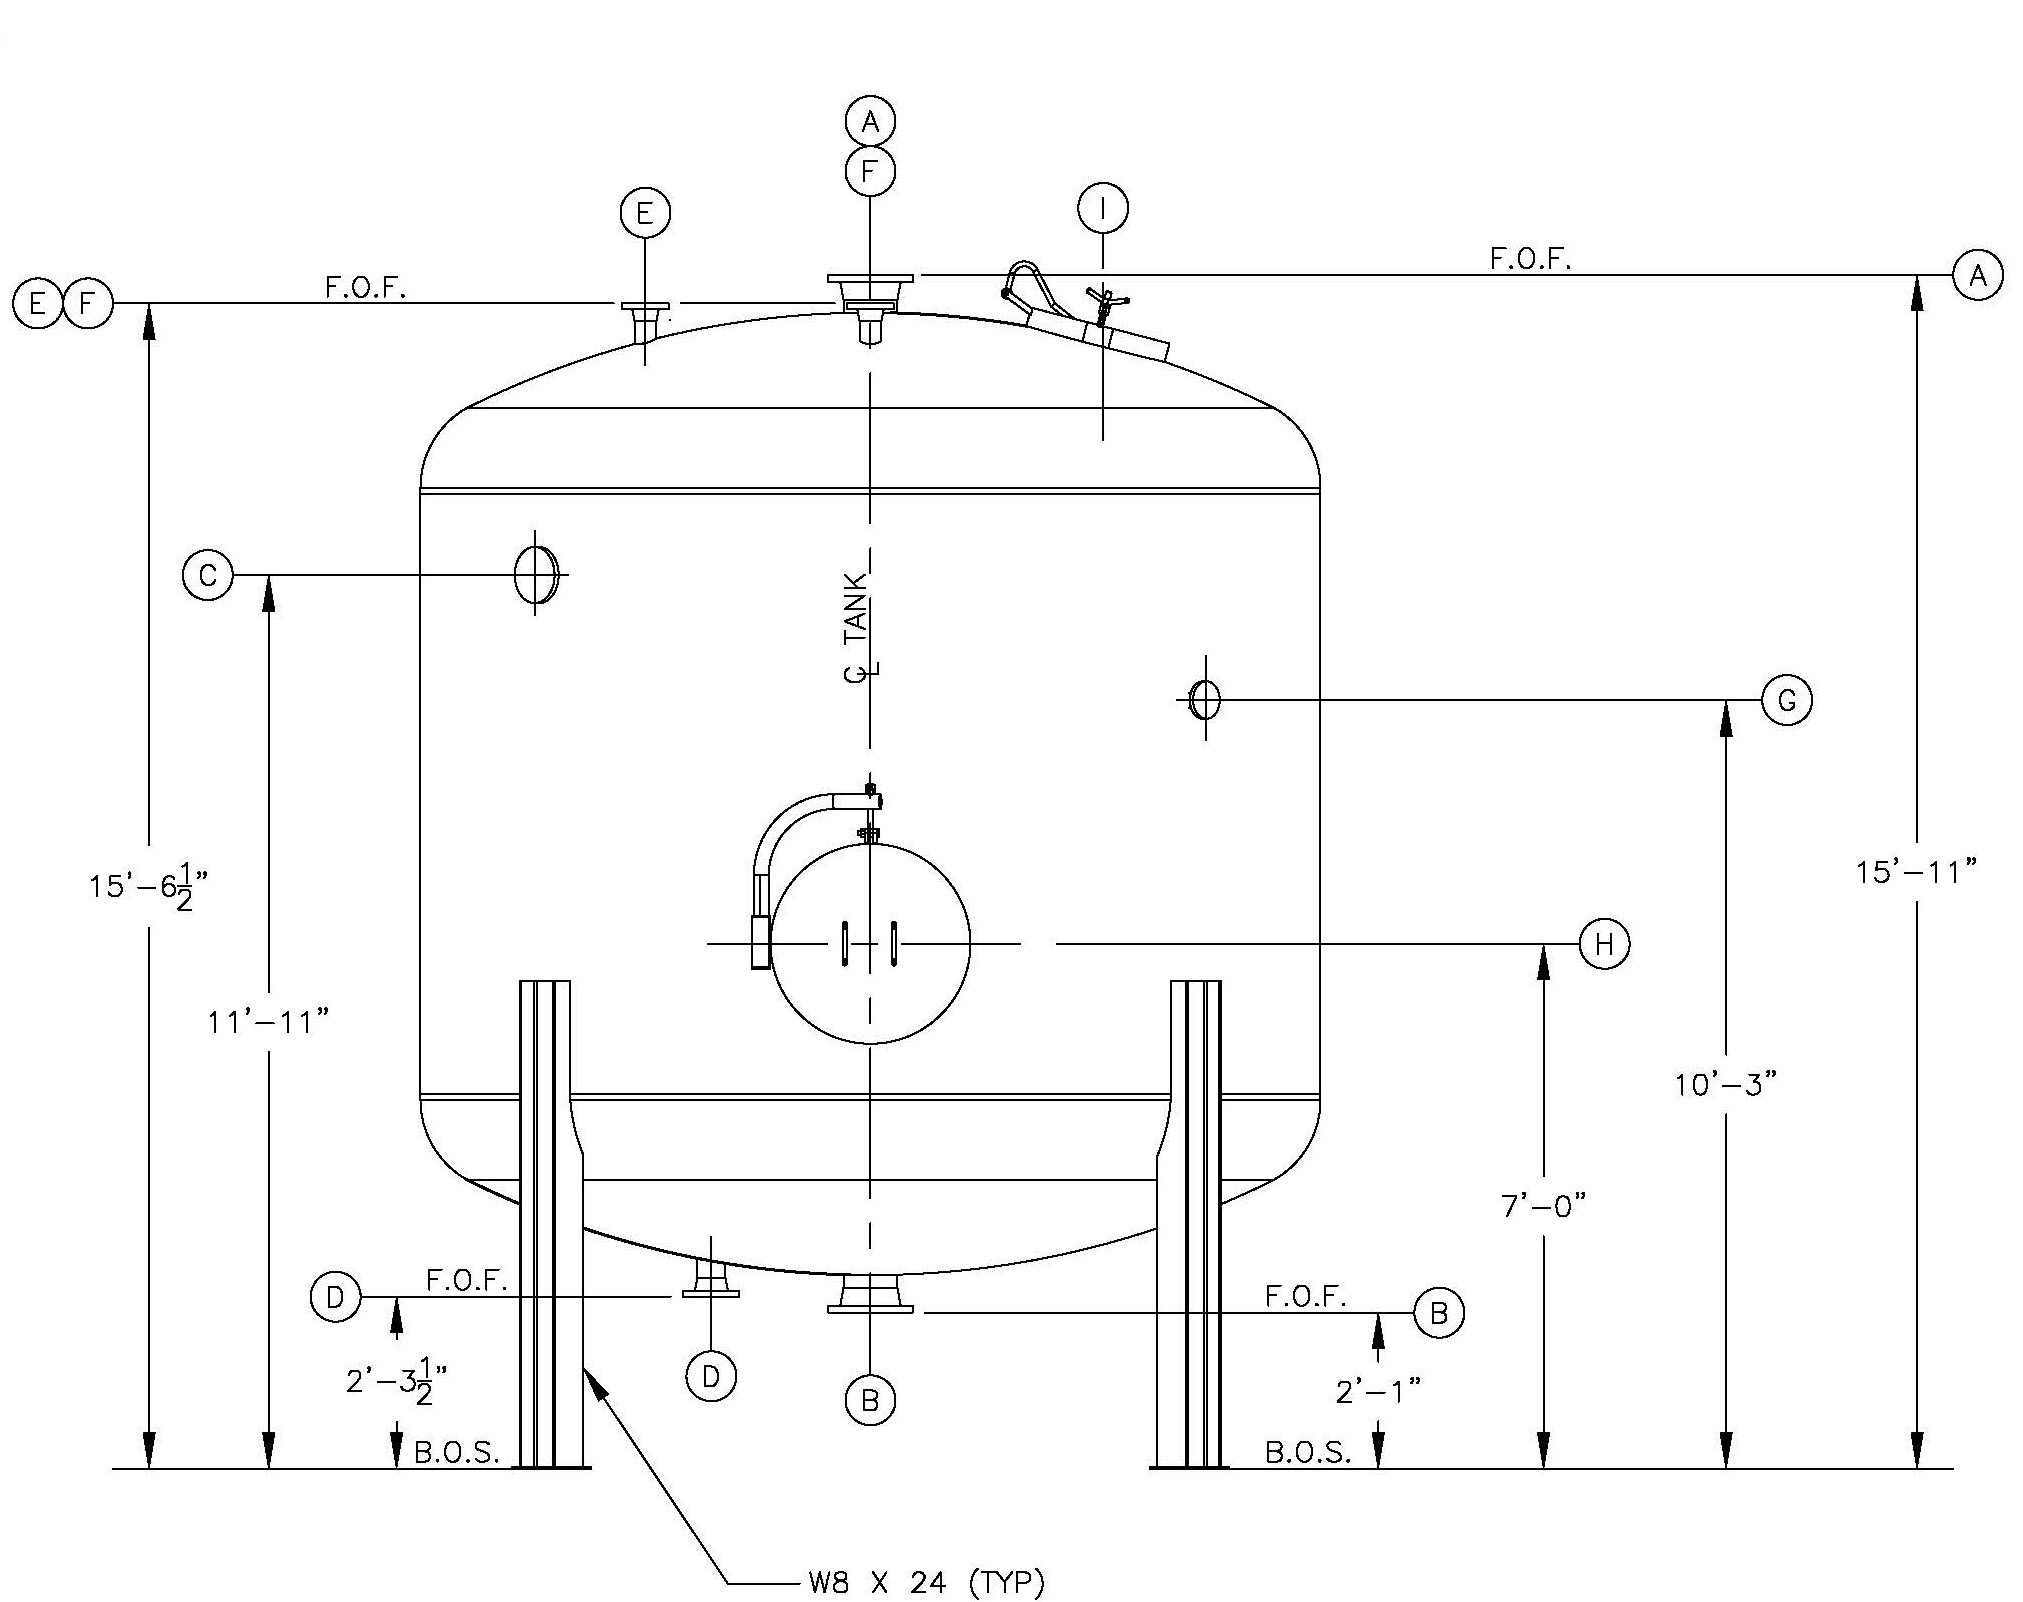 A black-and-white engineering drawing, complete with dimensions, showing a custom solution by Crest Water Solutions to remove impurities from a cooling tower's feed water and other industrial wasterwater treatment applications.